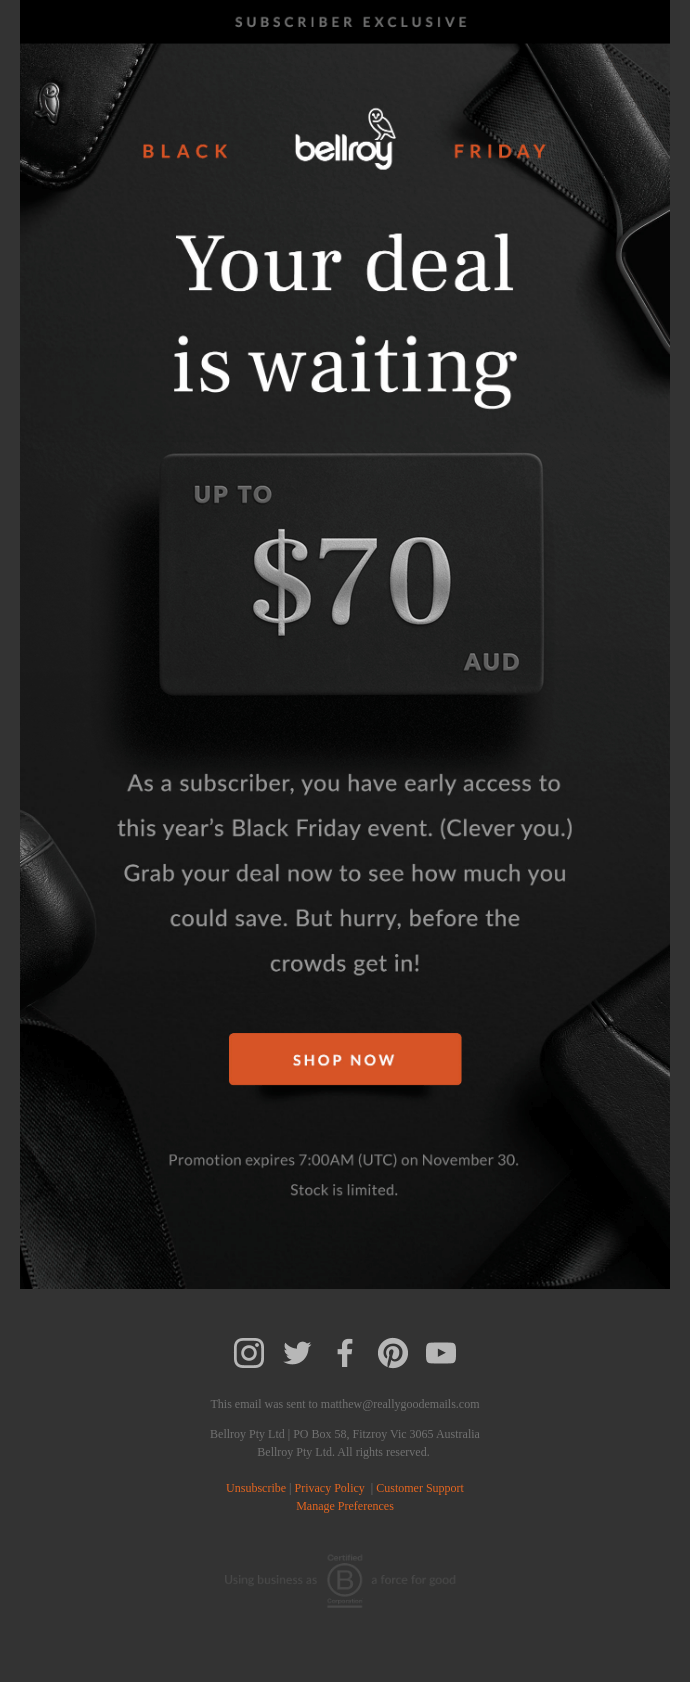 Your early access starts now! - Bellroy Email Newsletter